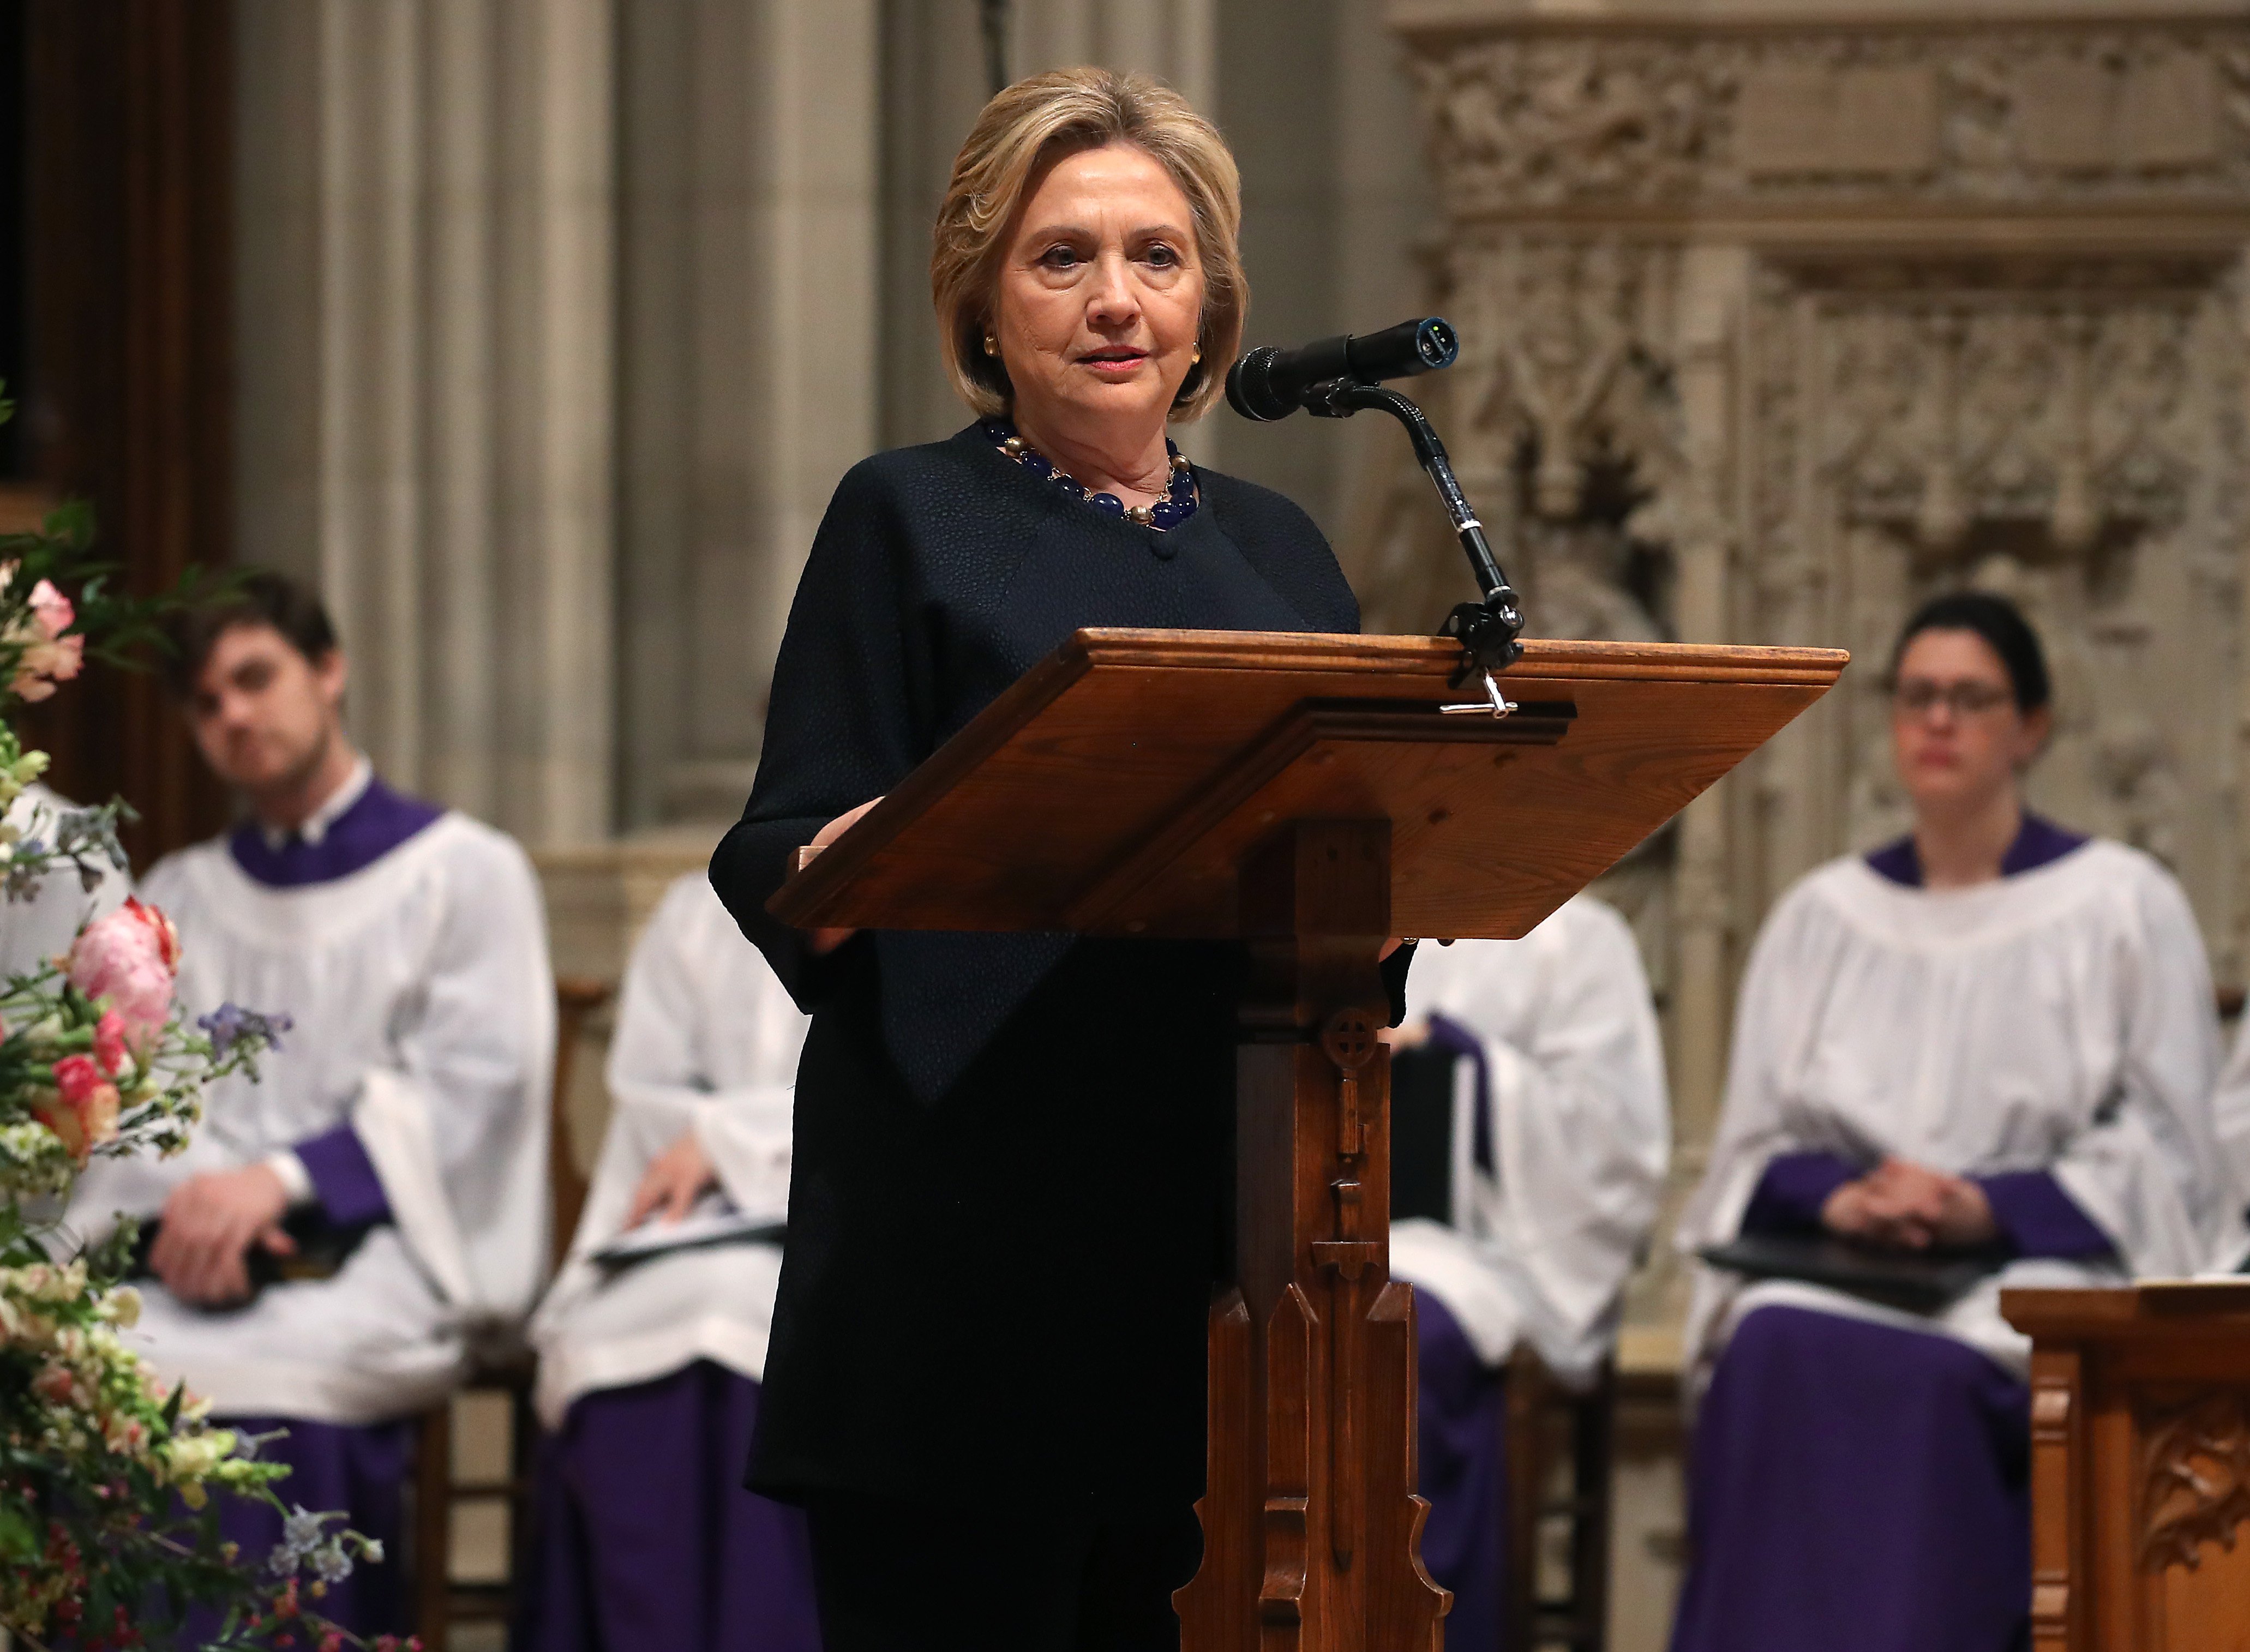 Hillary Clinton delivering a speech at Rep. Ellen Tauscher's memorial service at the Washington National Cathedral | Photo: Getty Images